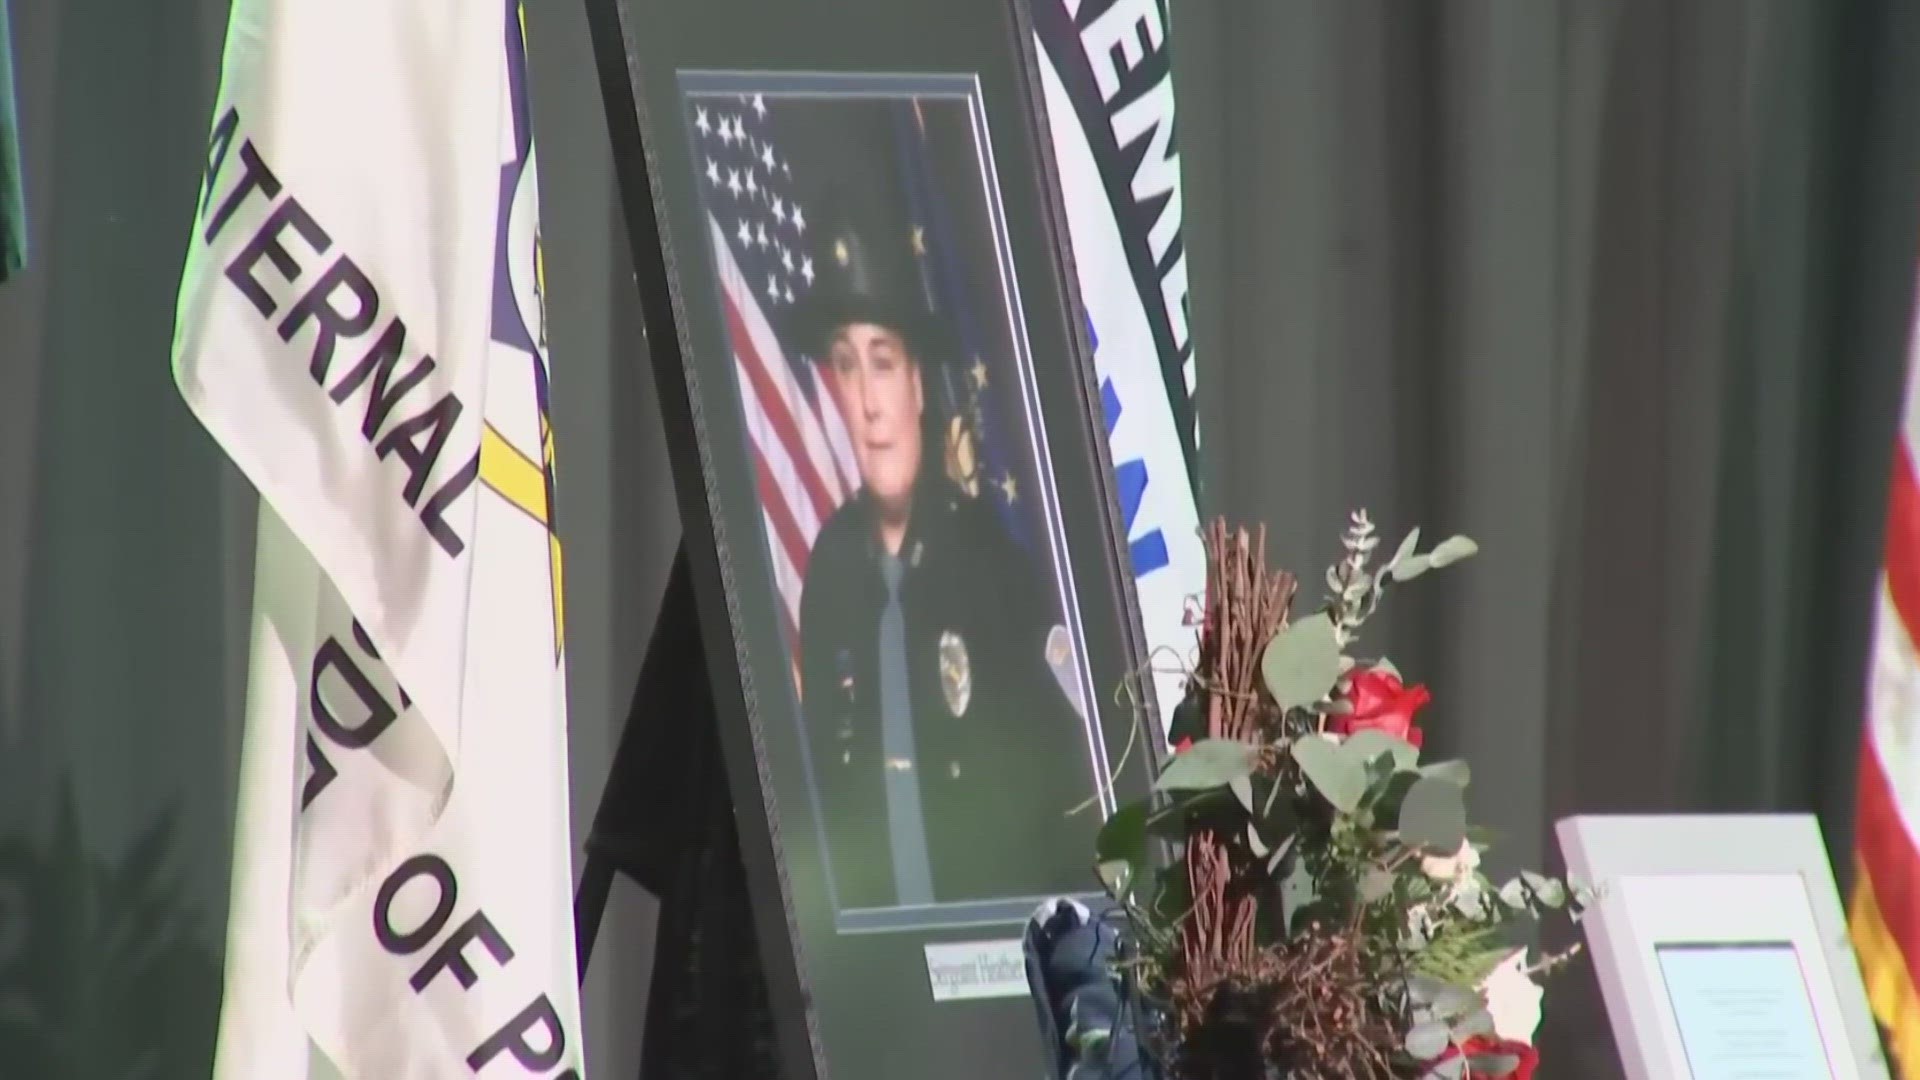 Sergeant Heather Glenn spent more than two decades of her life in law enforcement